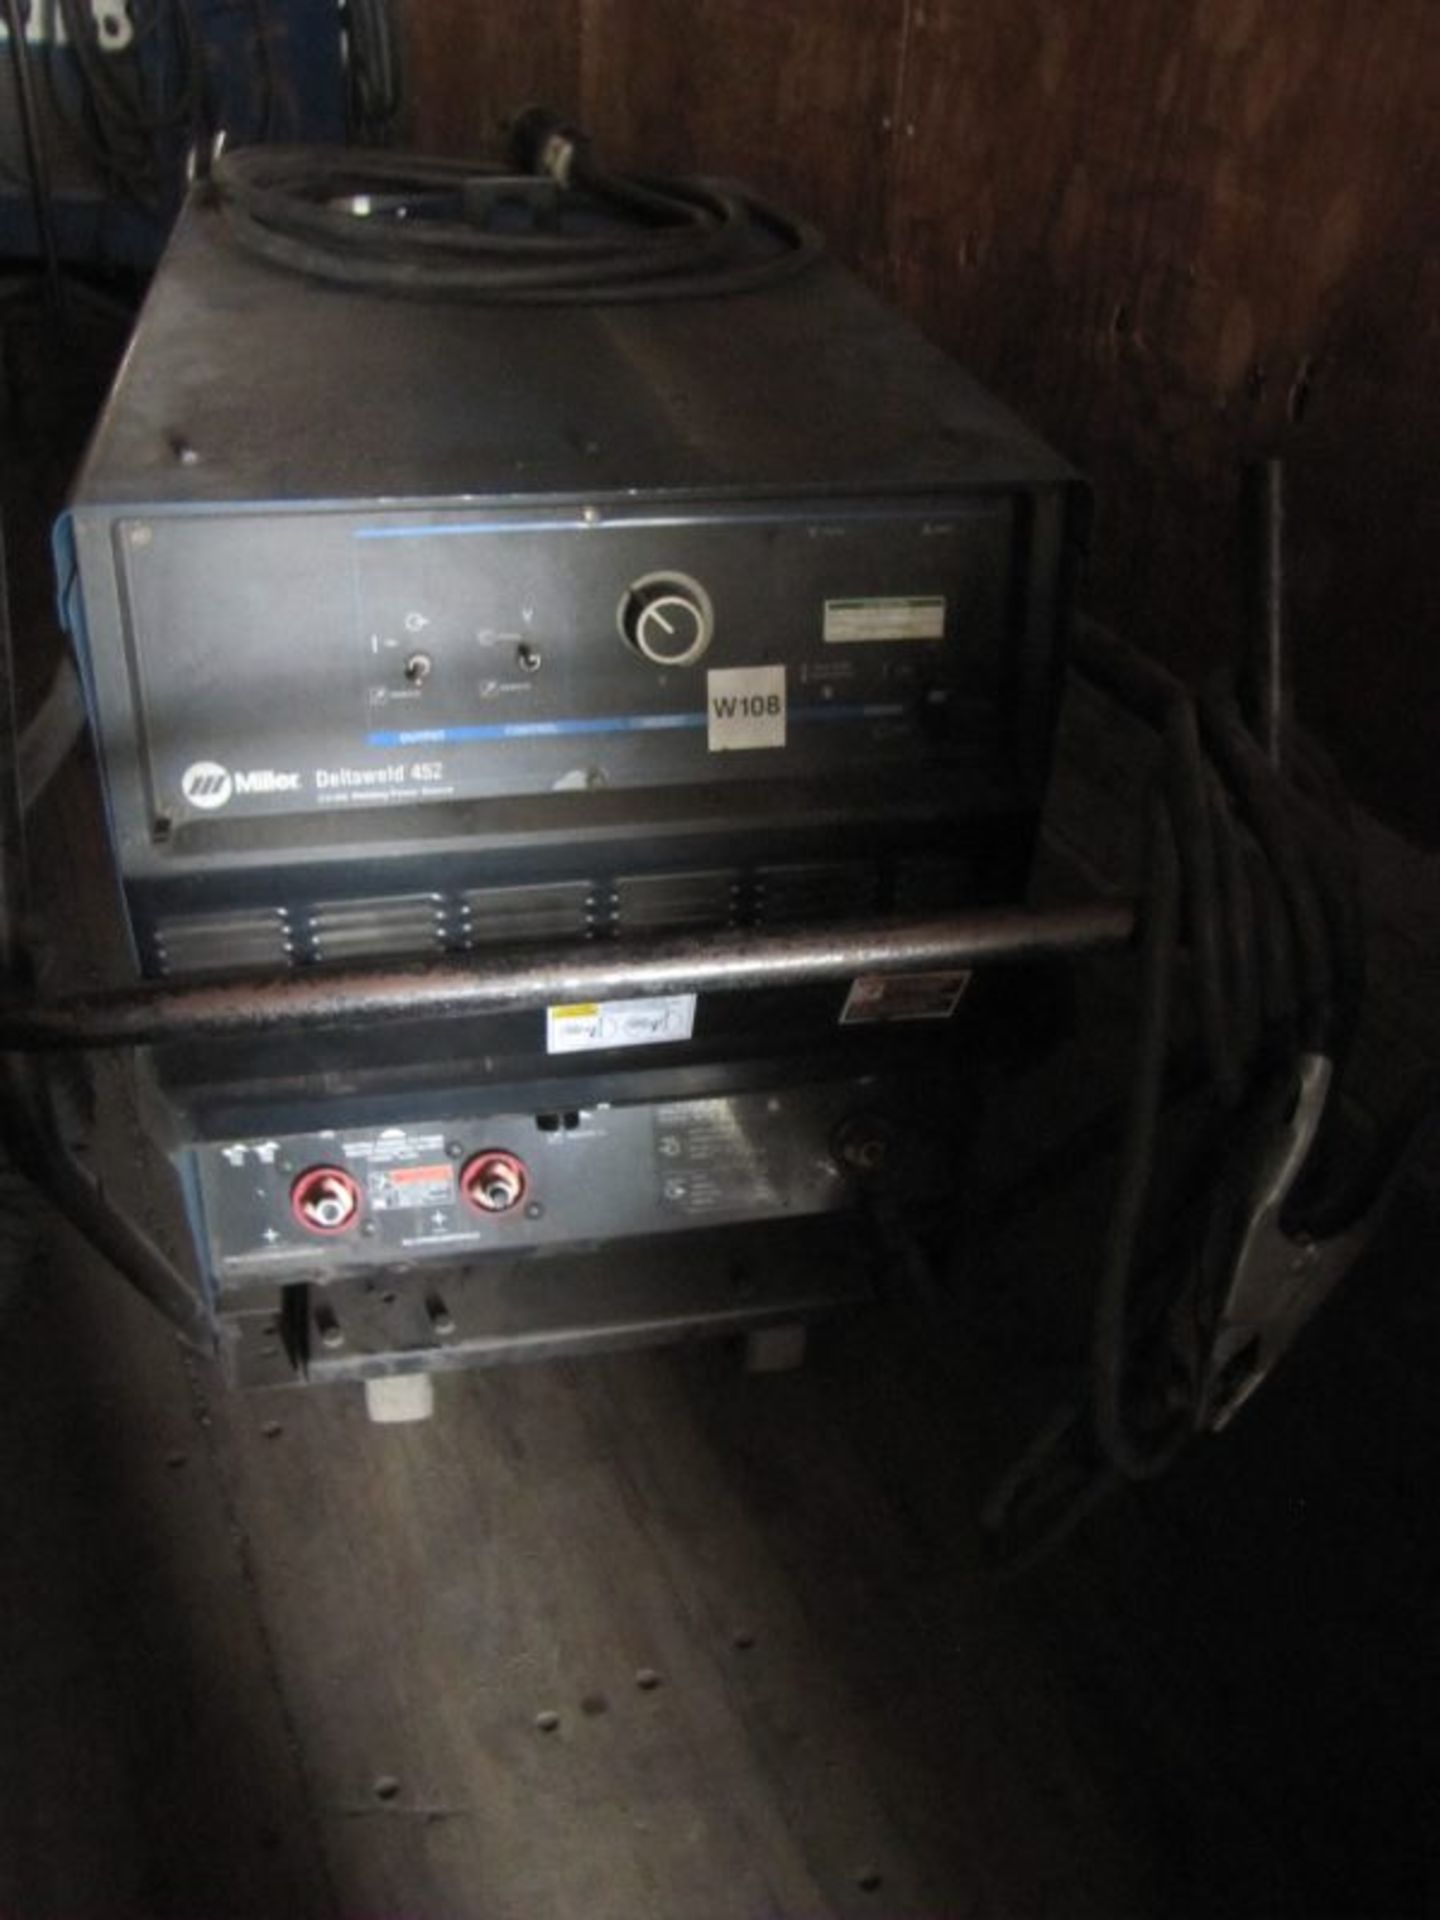 Miller Delta Weld 452 CV/DC Welding Power Source, S/N: LG231038C, Asset # W108, With Cable and - Image 4 of 6